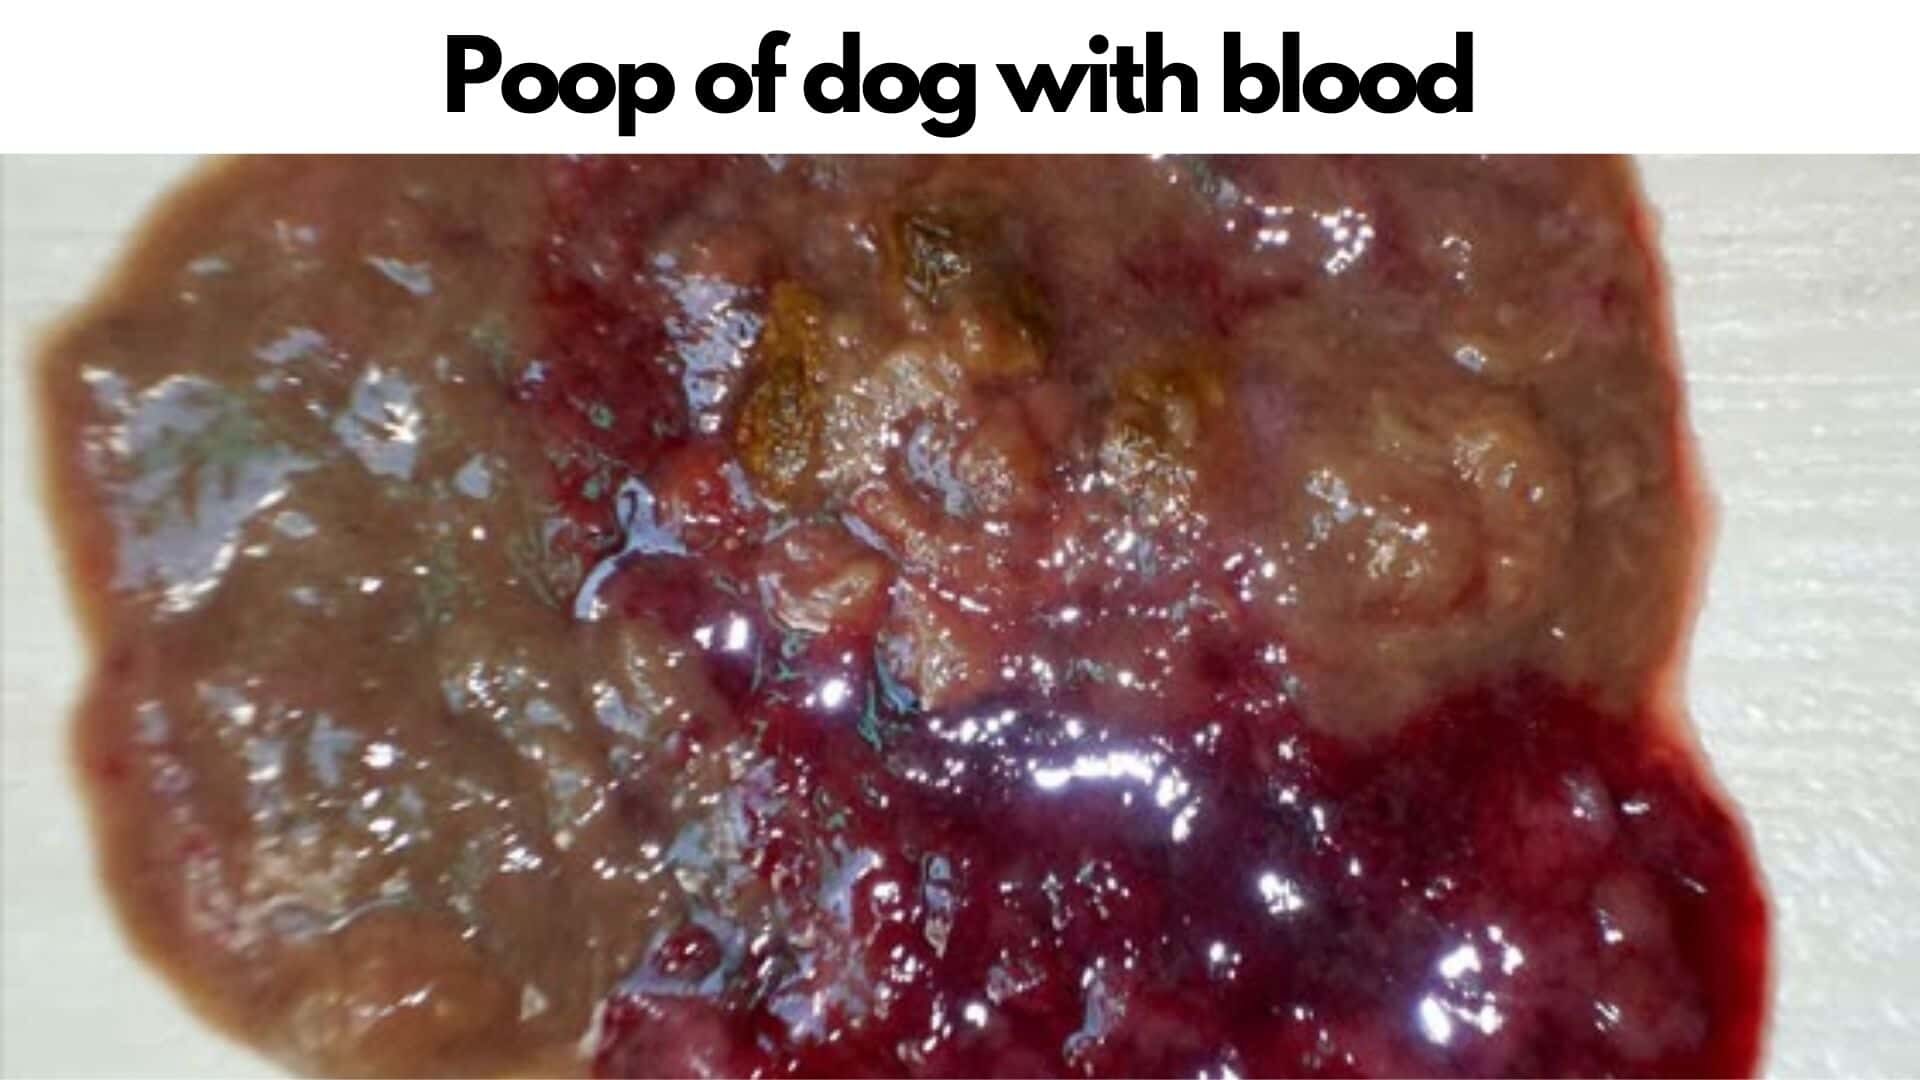 Picture of dog poop with blood